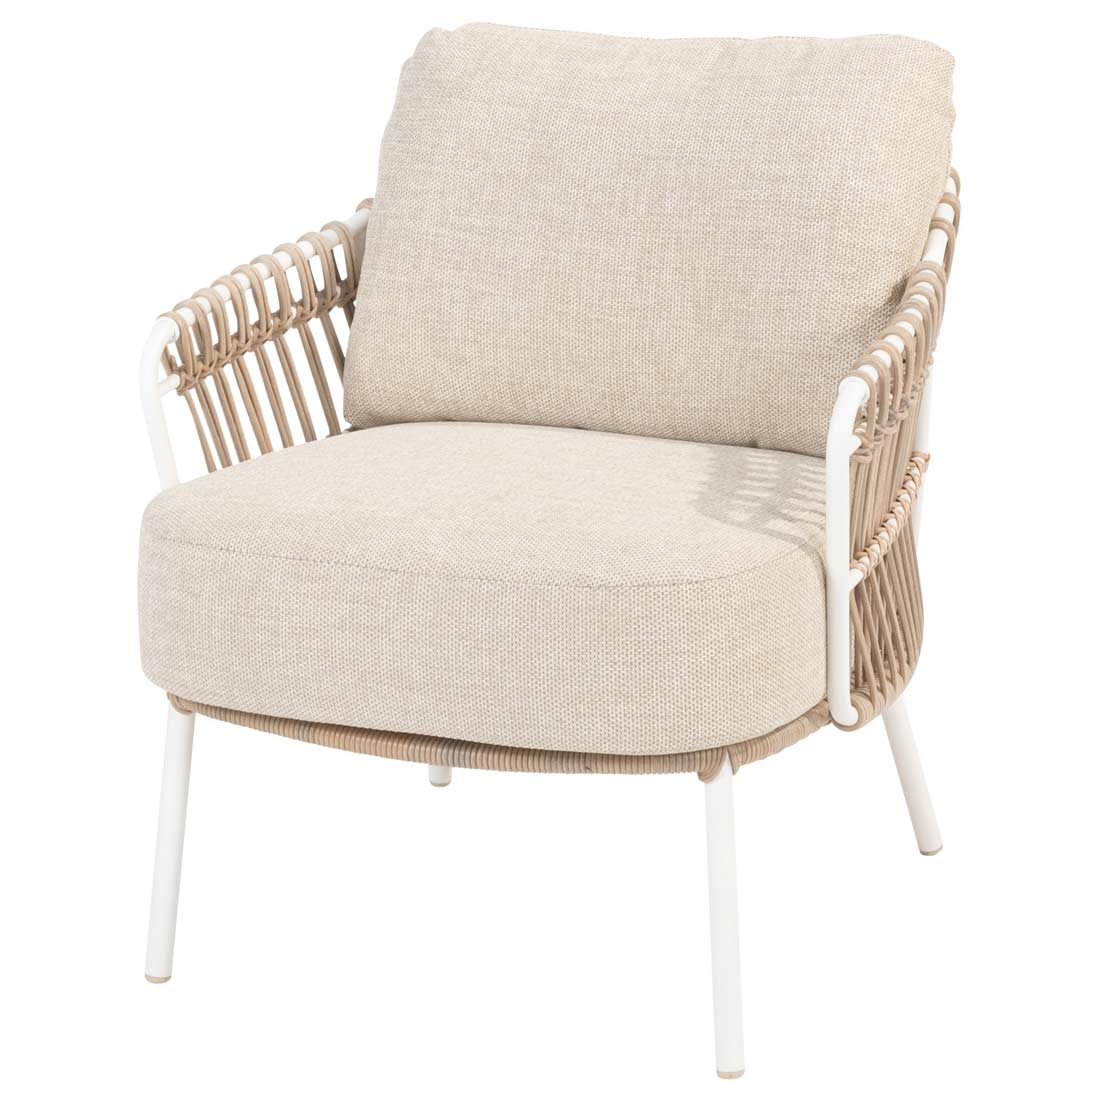 Dalias low dining chair White with 2 cushions